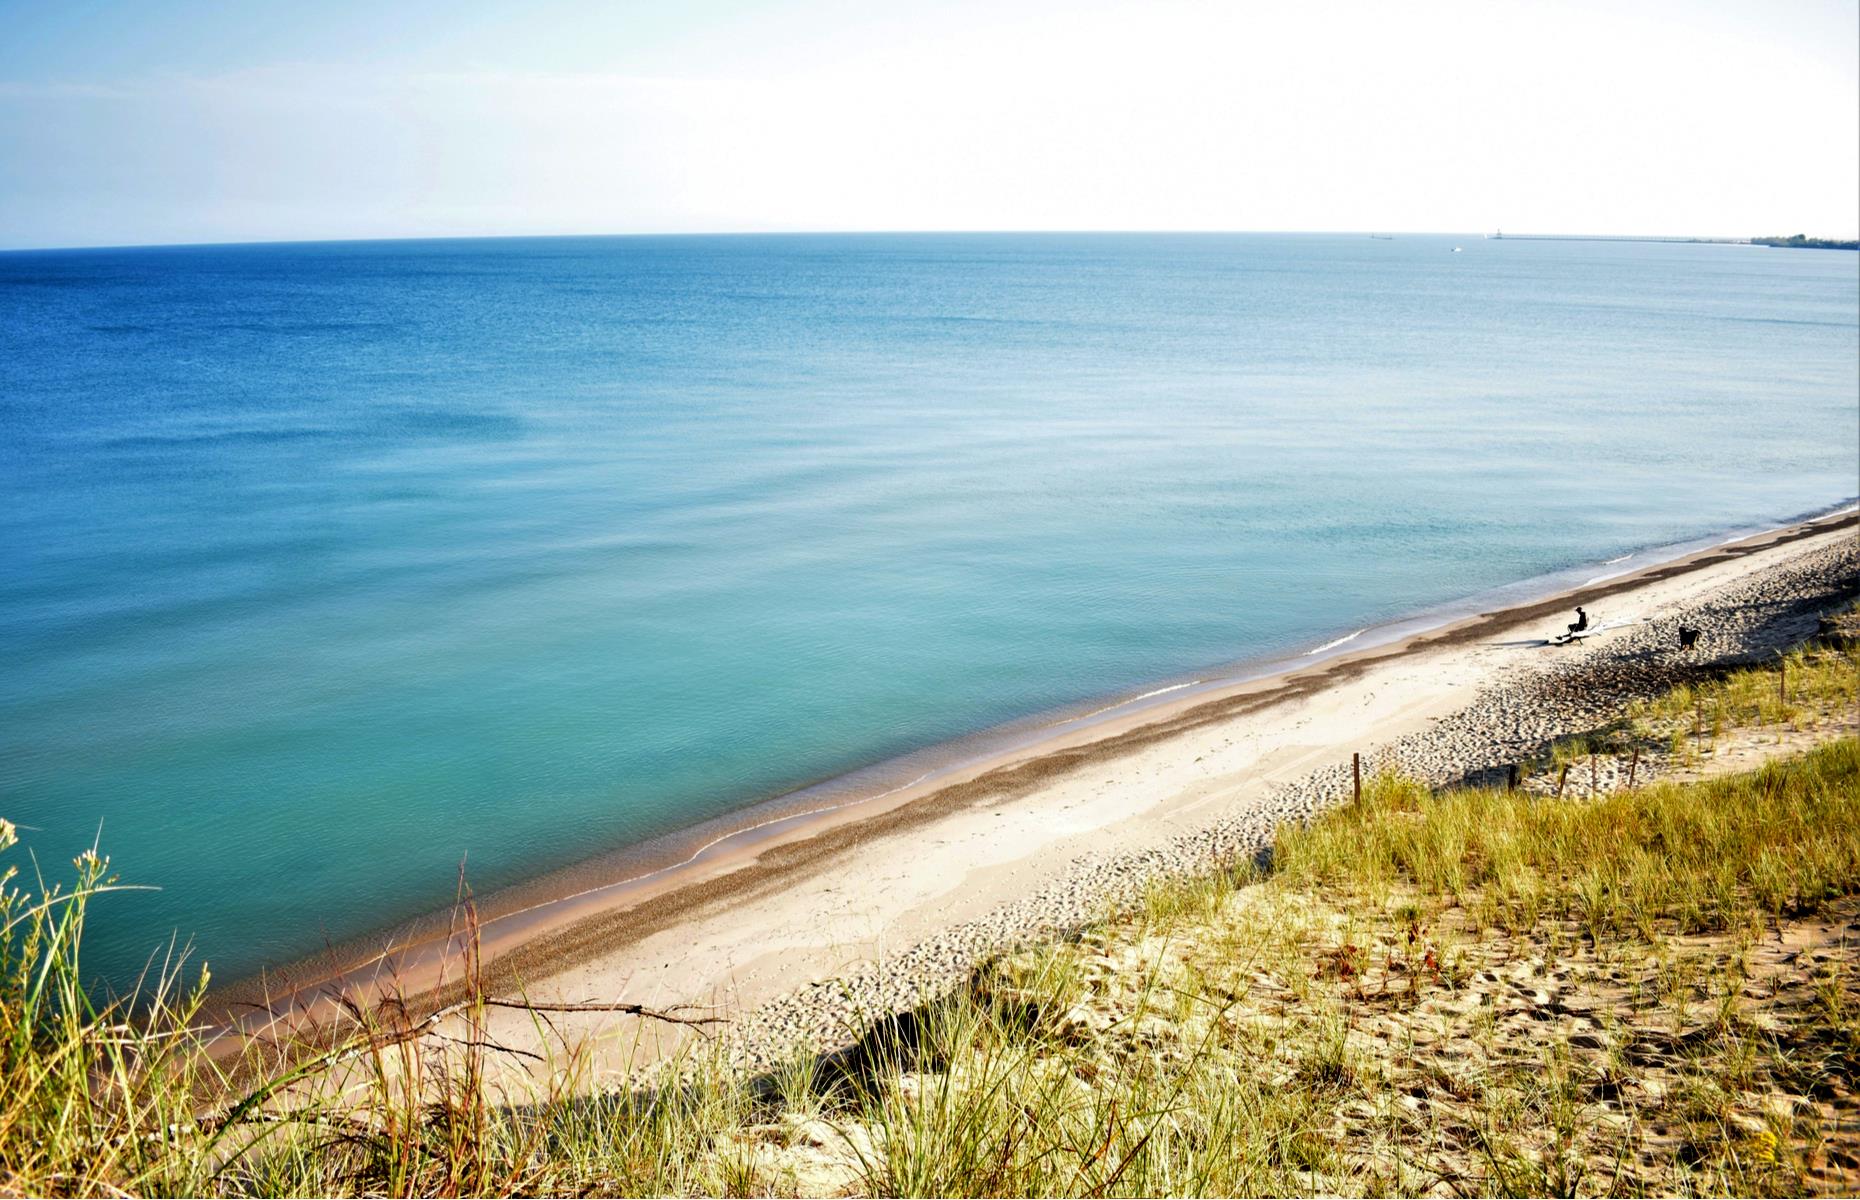 <p>One of America's newest national parks, <a href="https://www.nps.gov/indu/index.htm">Indiana Dunes</a> protects some 15 miles (24km) of Lake Michigan's shoreline. The 15,000-acre site is actually one of the most biodiverse in the whole national park system, with around 350 species of bird, plus landscapes ranging from dense forests and swampland to dunes soaring towards 200 feet (61m). It's a year-round destination too – frolic on the sands and swim in the lake in summer, then come back in winter for a spot of cross-country skiing.</p>